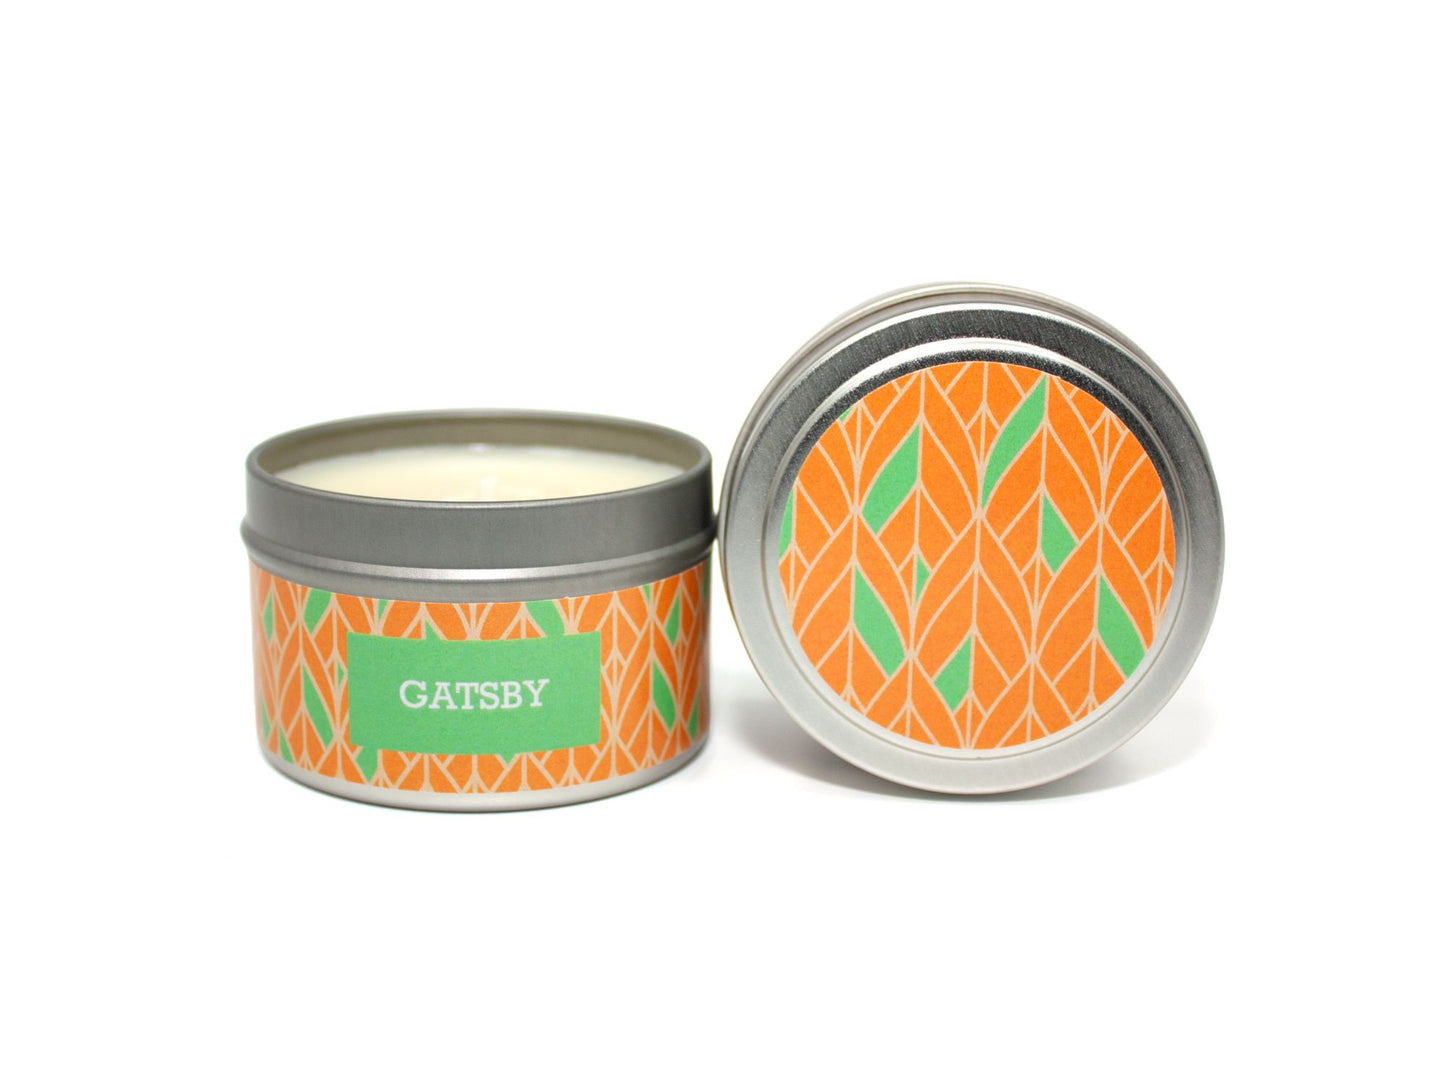 Onset & Rime champagne and satsuma scented candle called "Gatsby" in a 4 oz silver tin. The circular label on top a green and orange art deco pattern. The text on the front label is "Gatsby - Champagne, Satsuma, Lime".